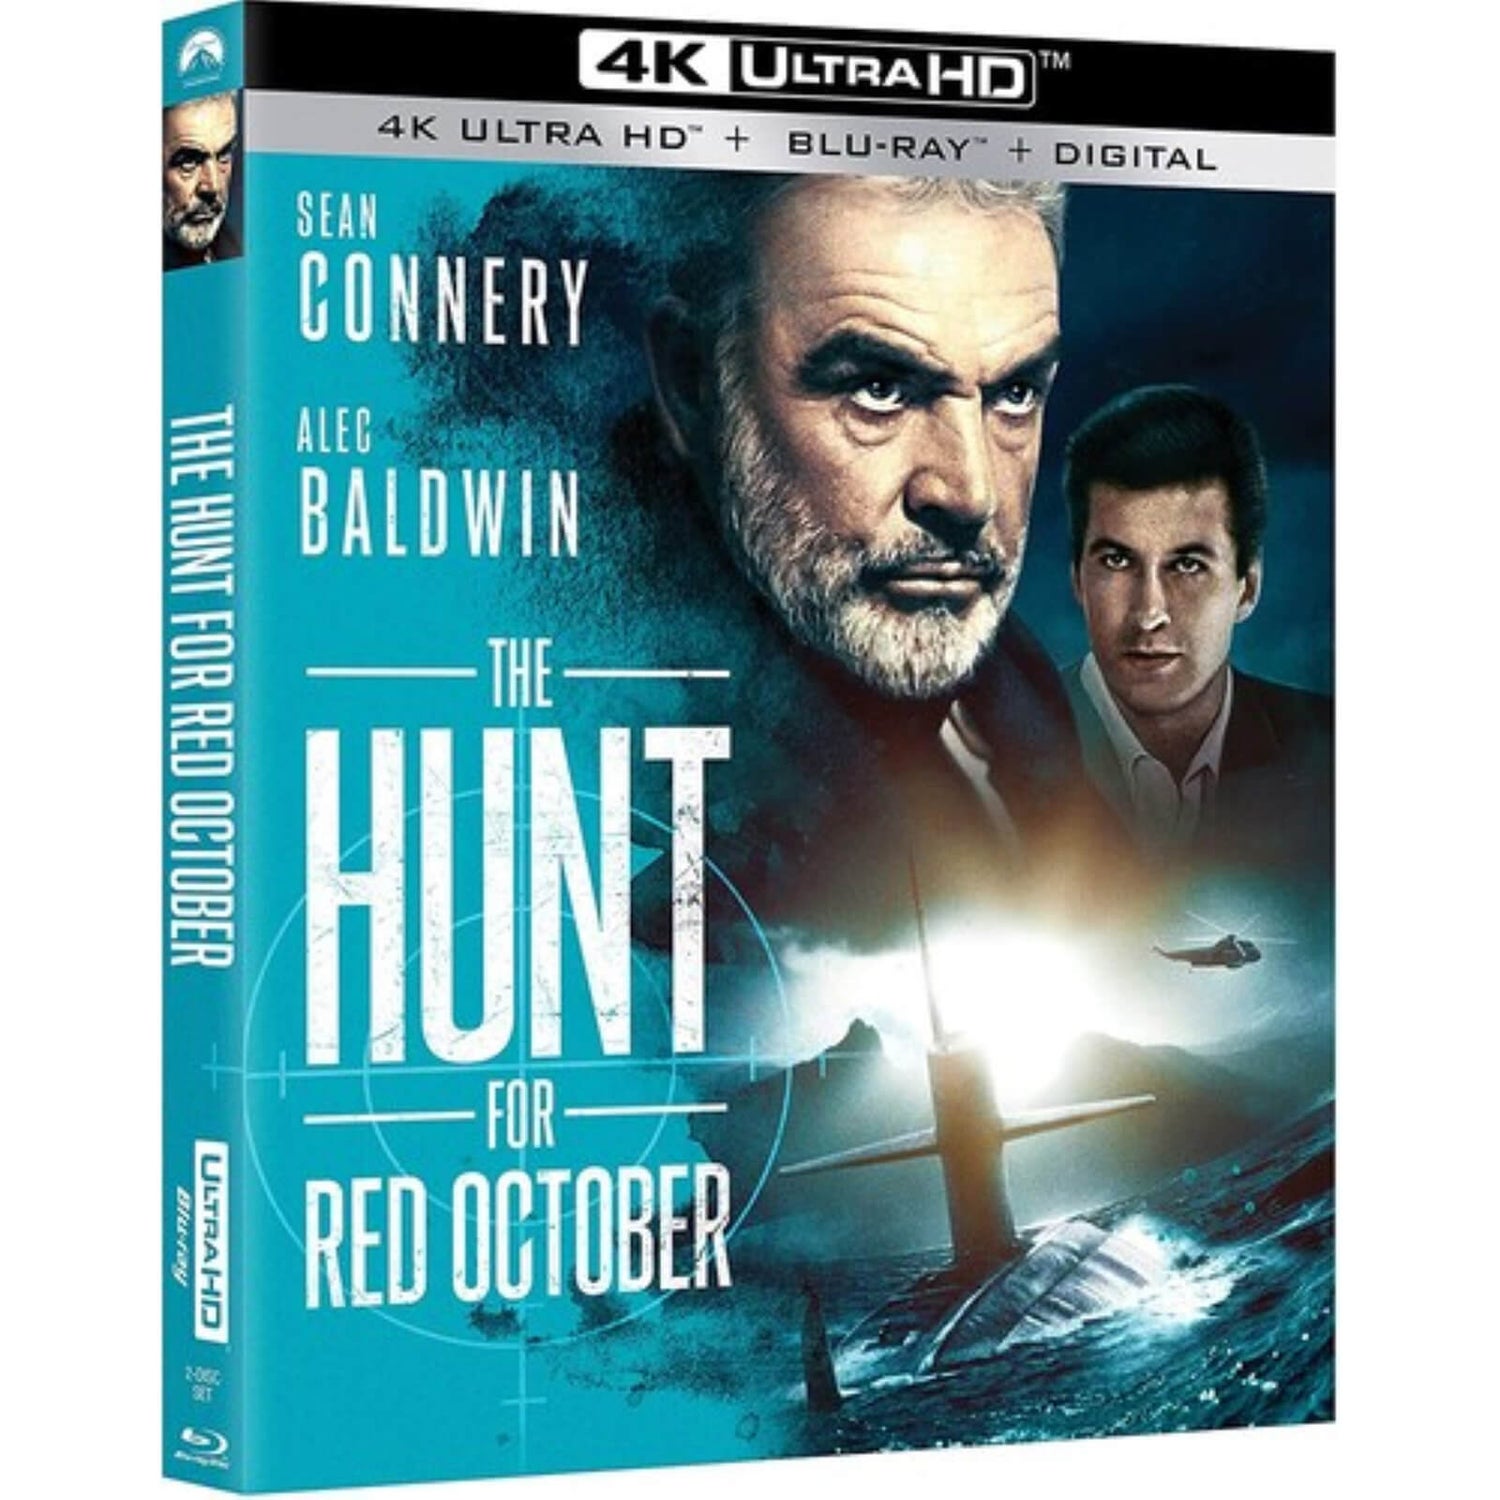 The Hunt for Red October - 4K Ultra HD (Includes Blu-ray) (US Import)